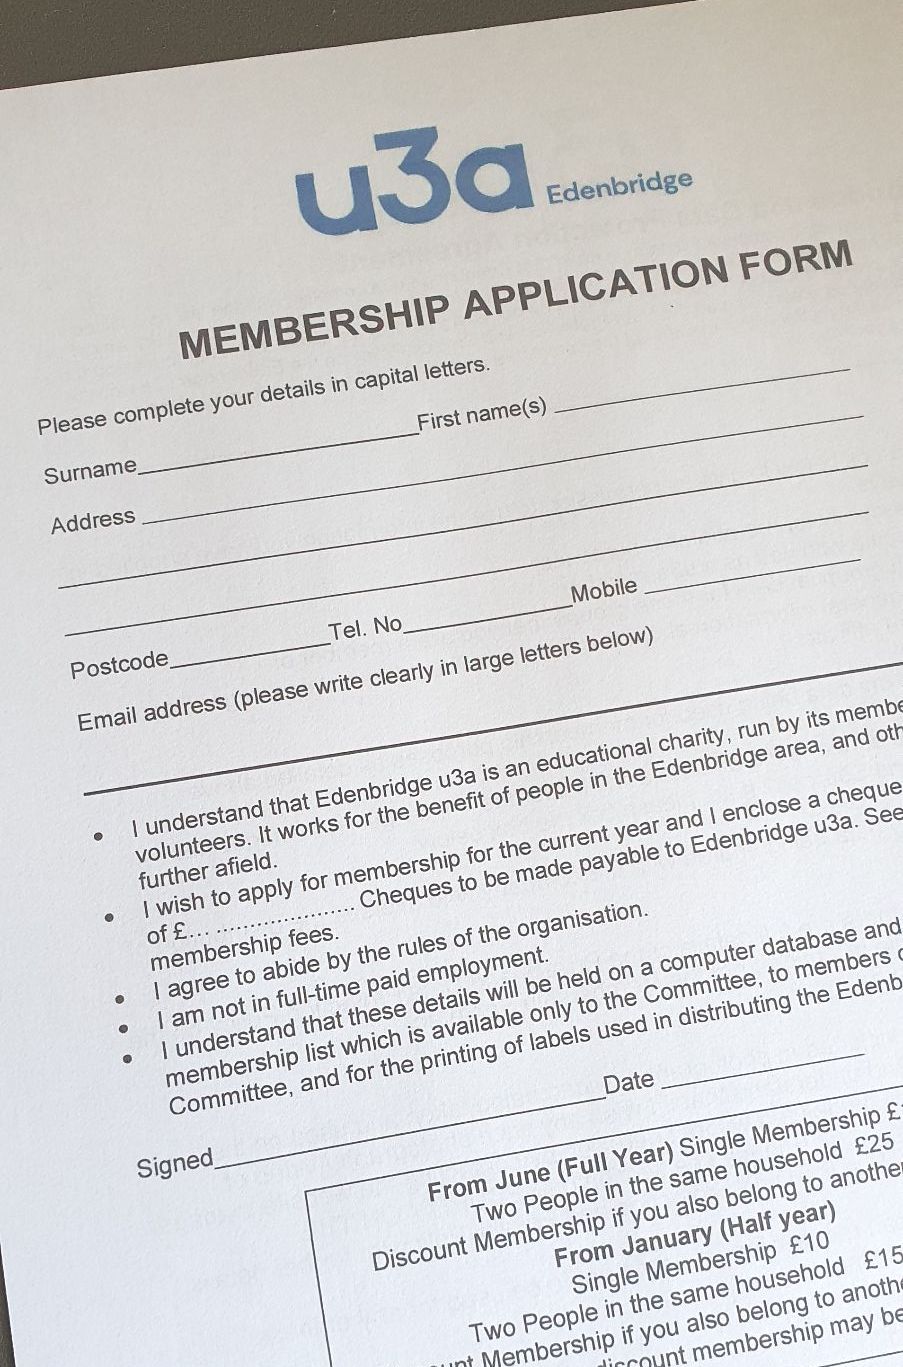 image of application form